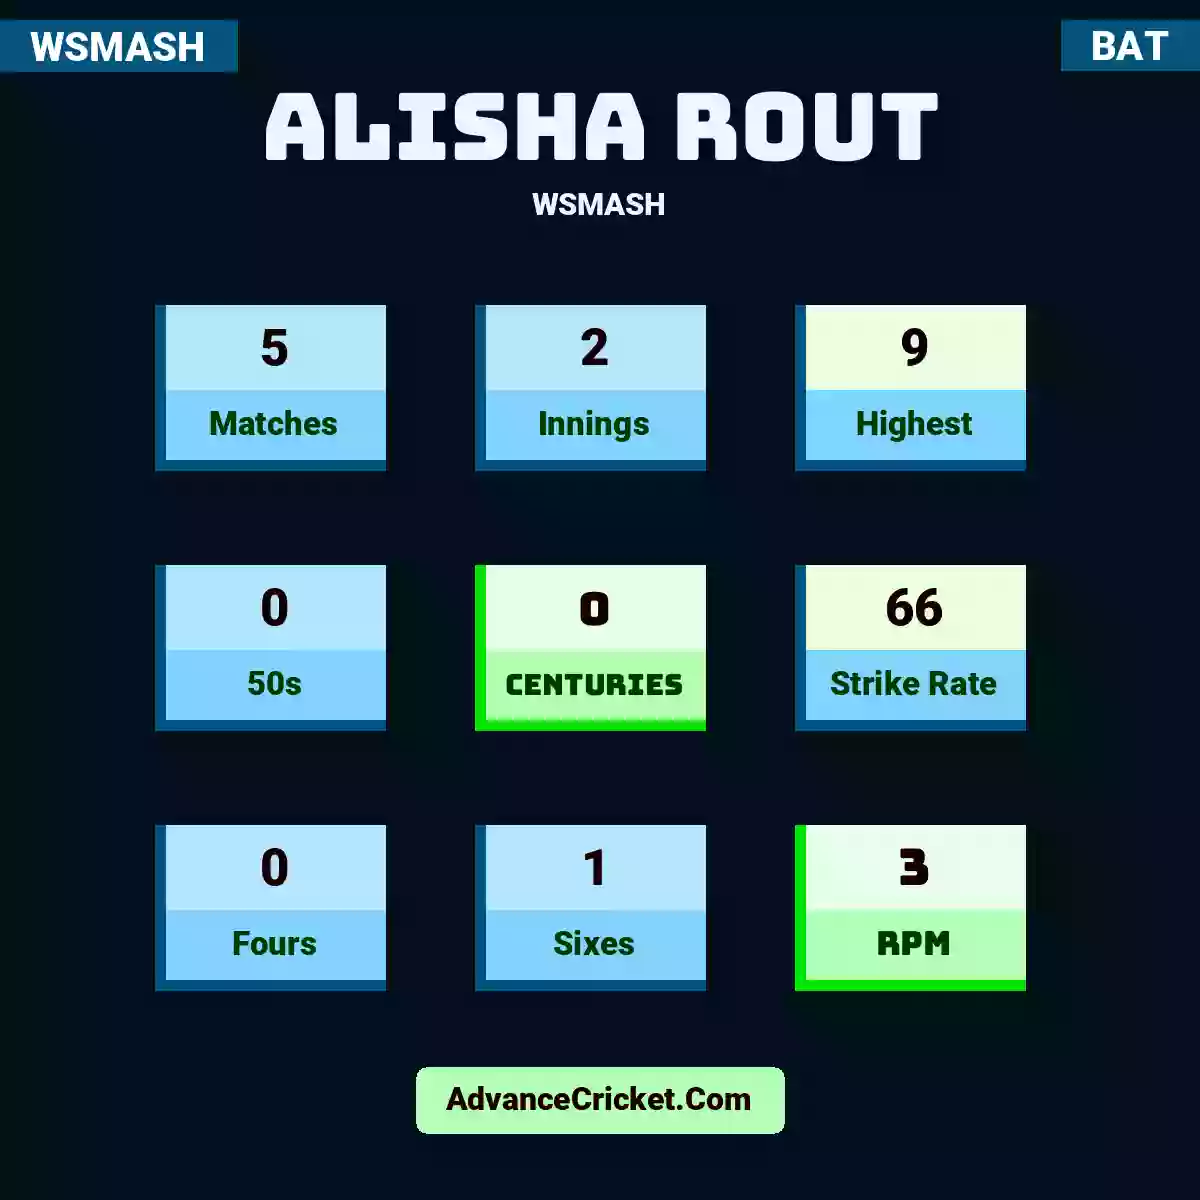 Alisha Rout WSMASH , Alisha Rout played 5 matches, scored 9 runs as highest, 0 half-centuries, and 0 centuries, with a strike rate of 66. A.Rout hit 0 fours and 1 sixes, with an RPM of 3.